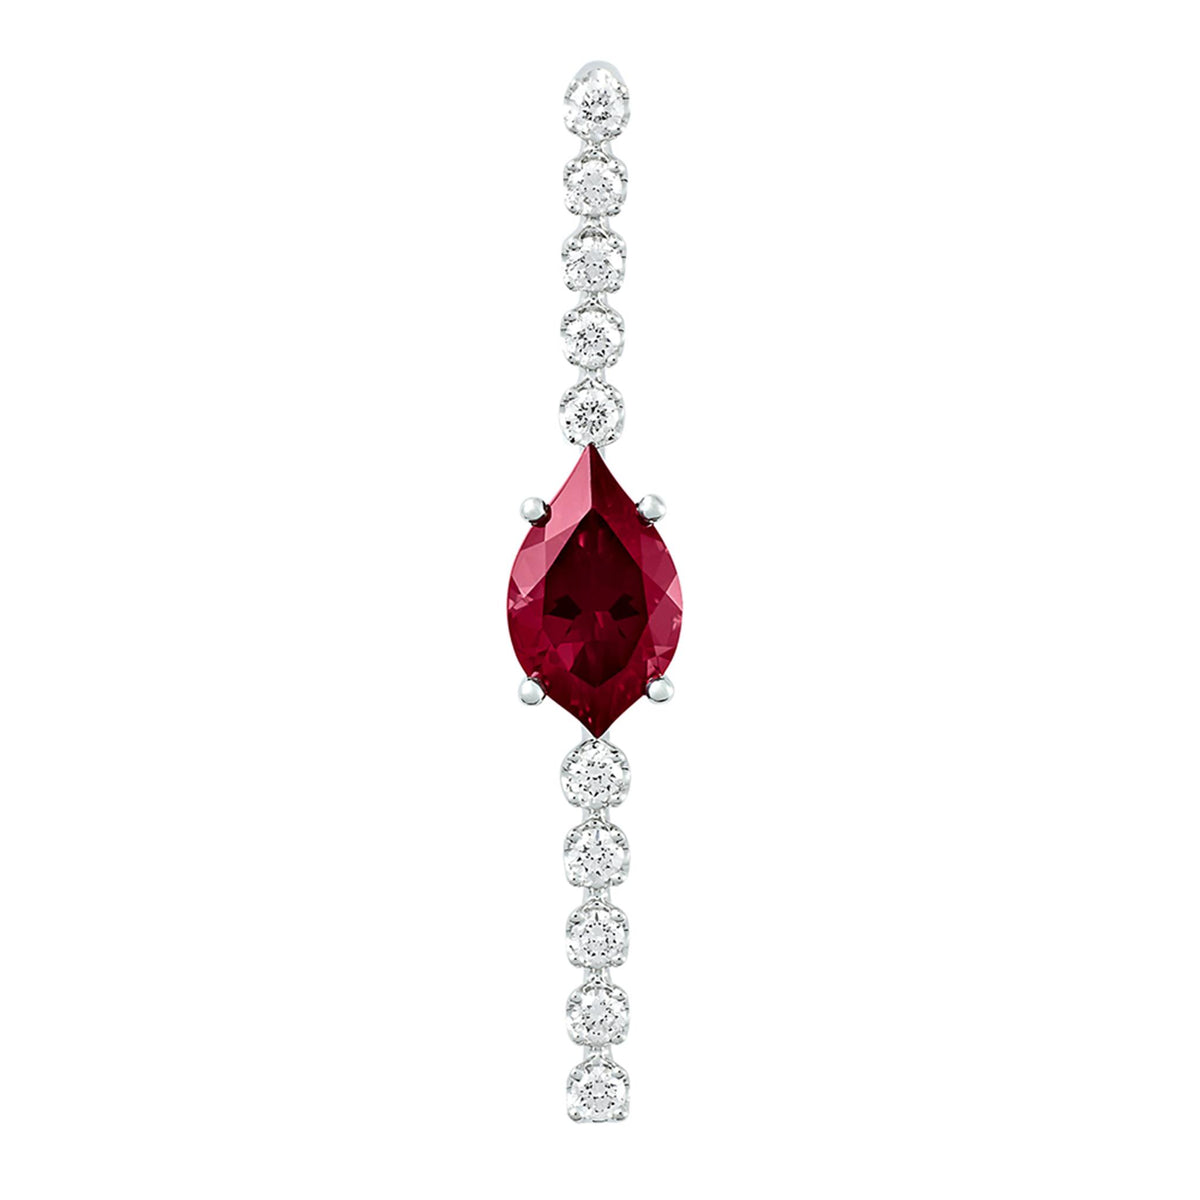 14Kt White Gold Stilleto-Style Pendant With 1.61ct Chatham Lab Created Ruby